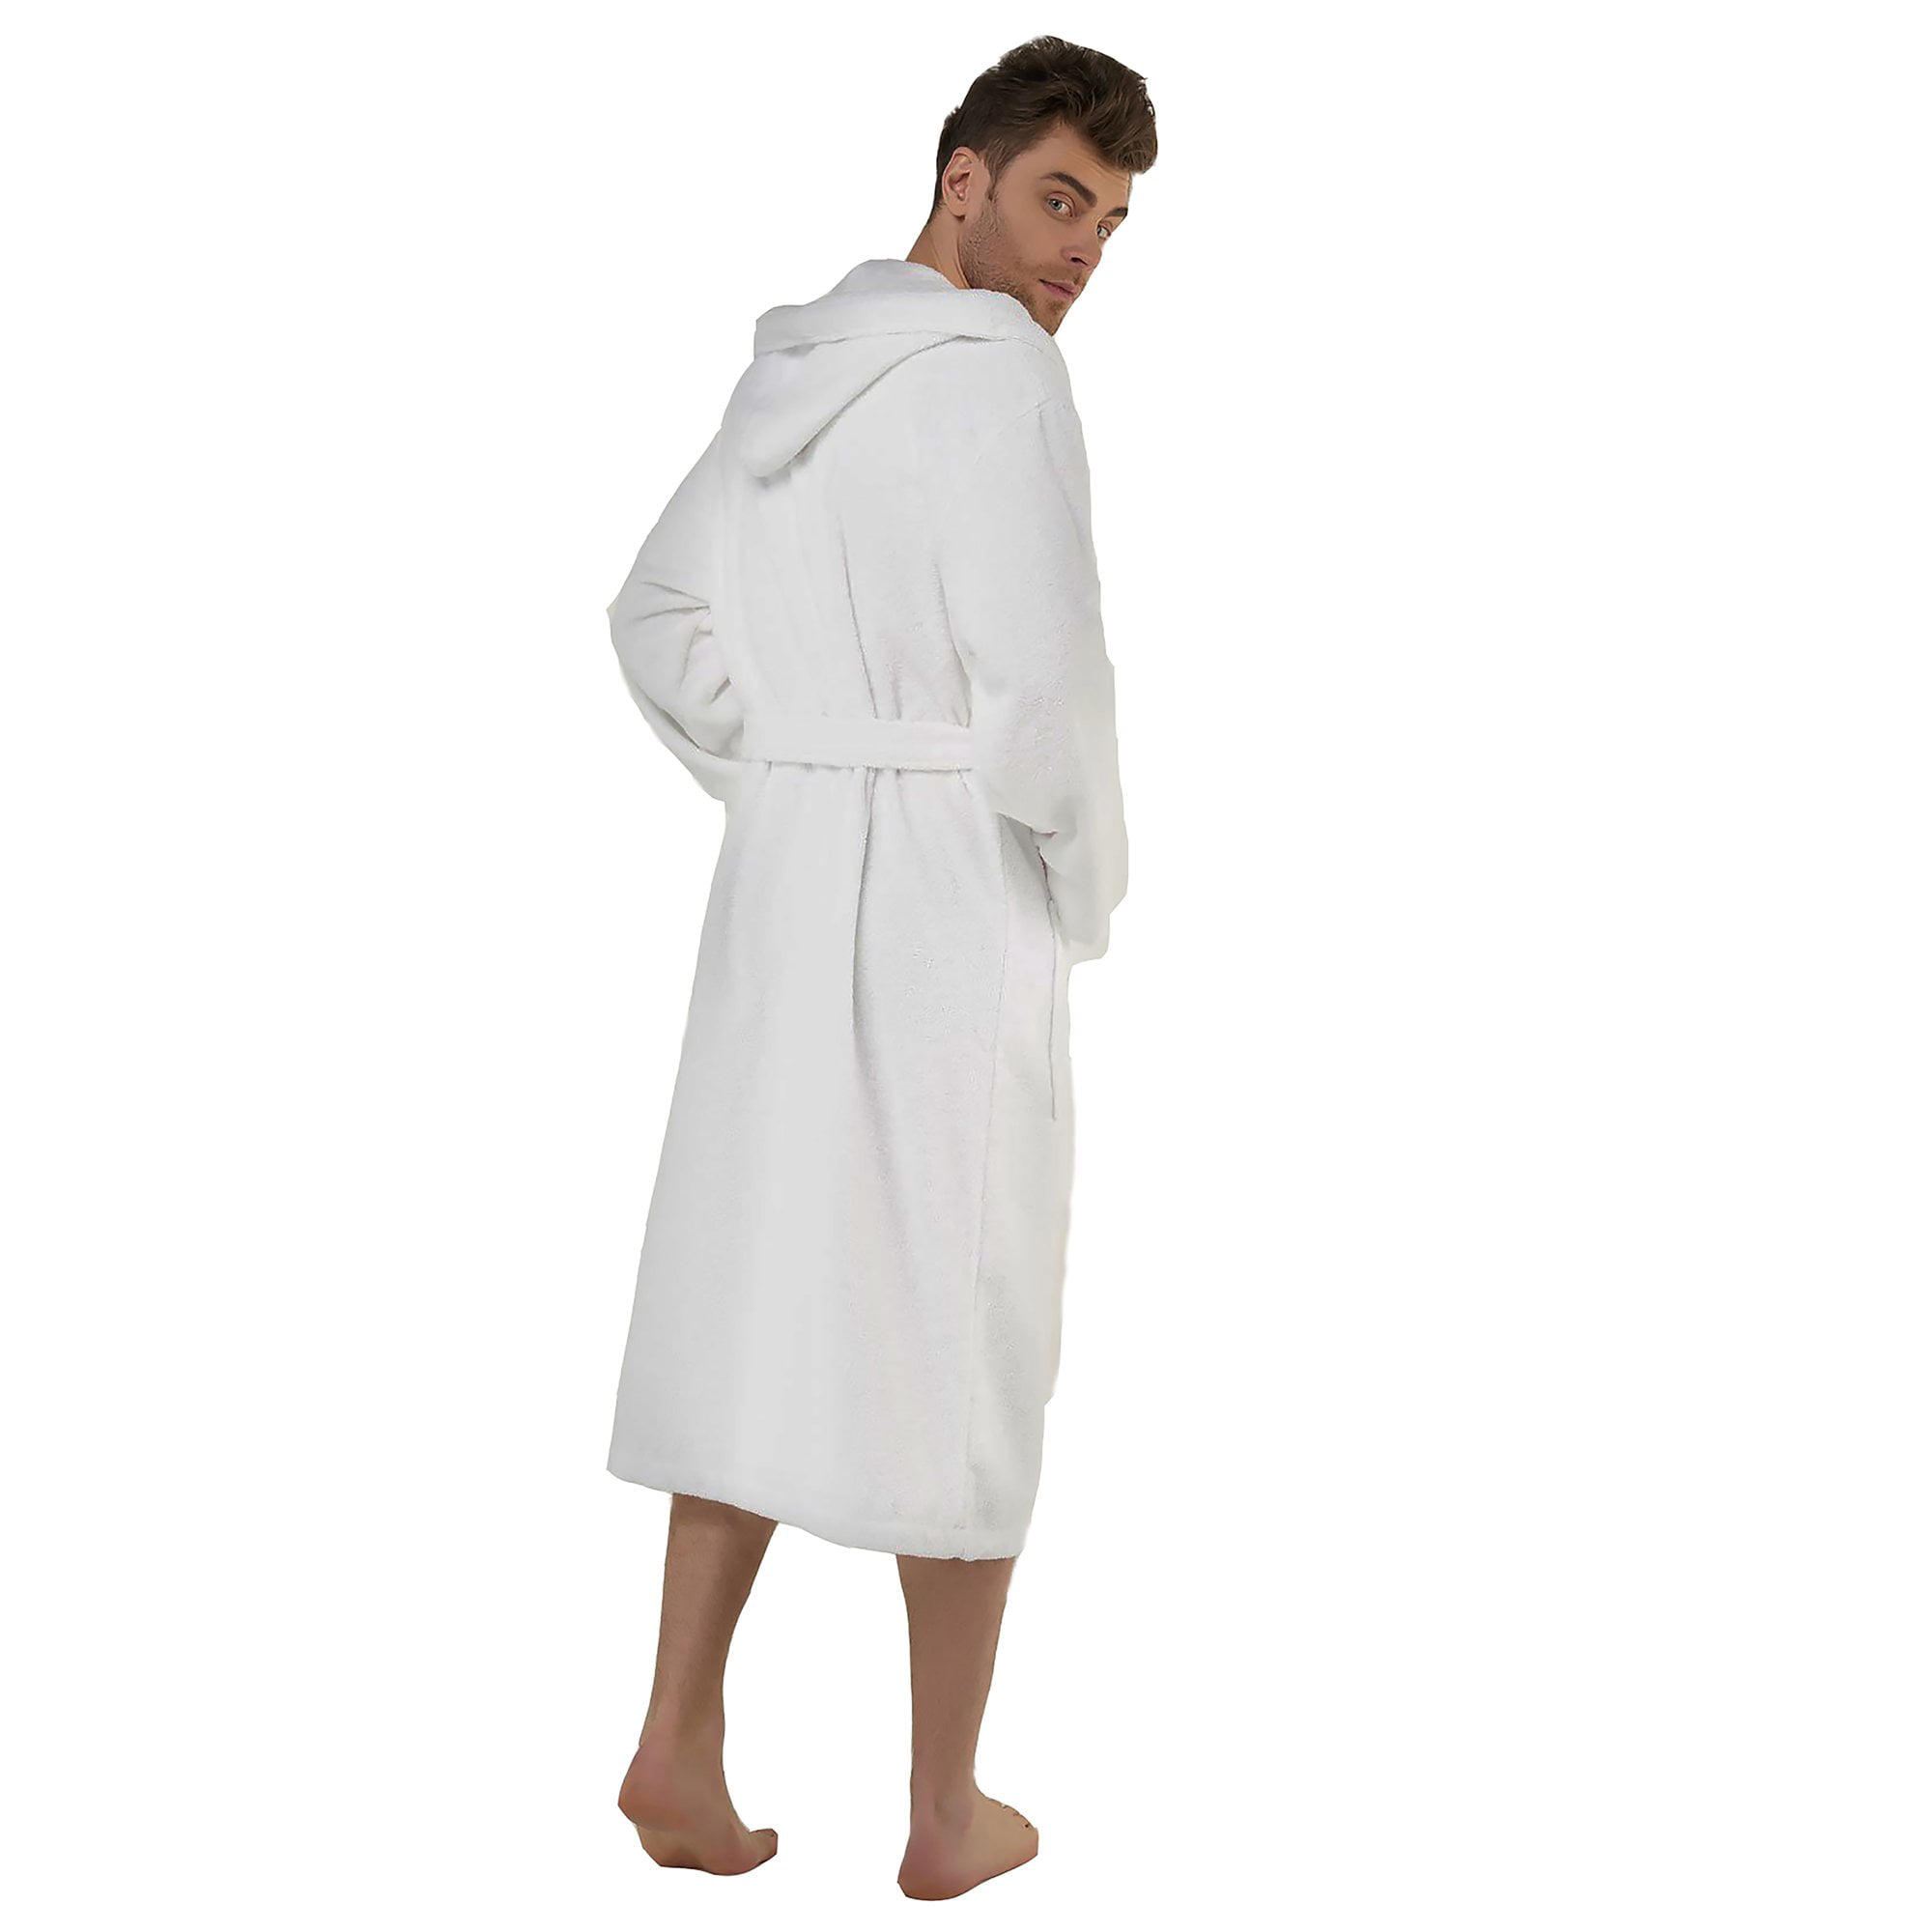 Men's Luxury Vintage Style Silk Dressing Gowns, Classic Robes and Pajamas